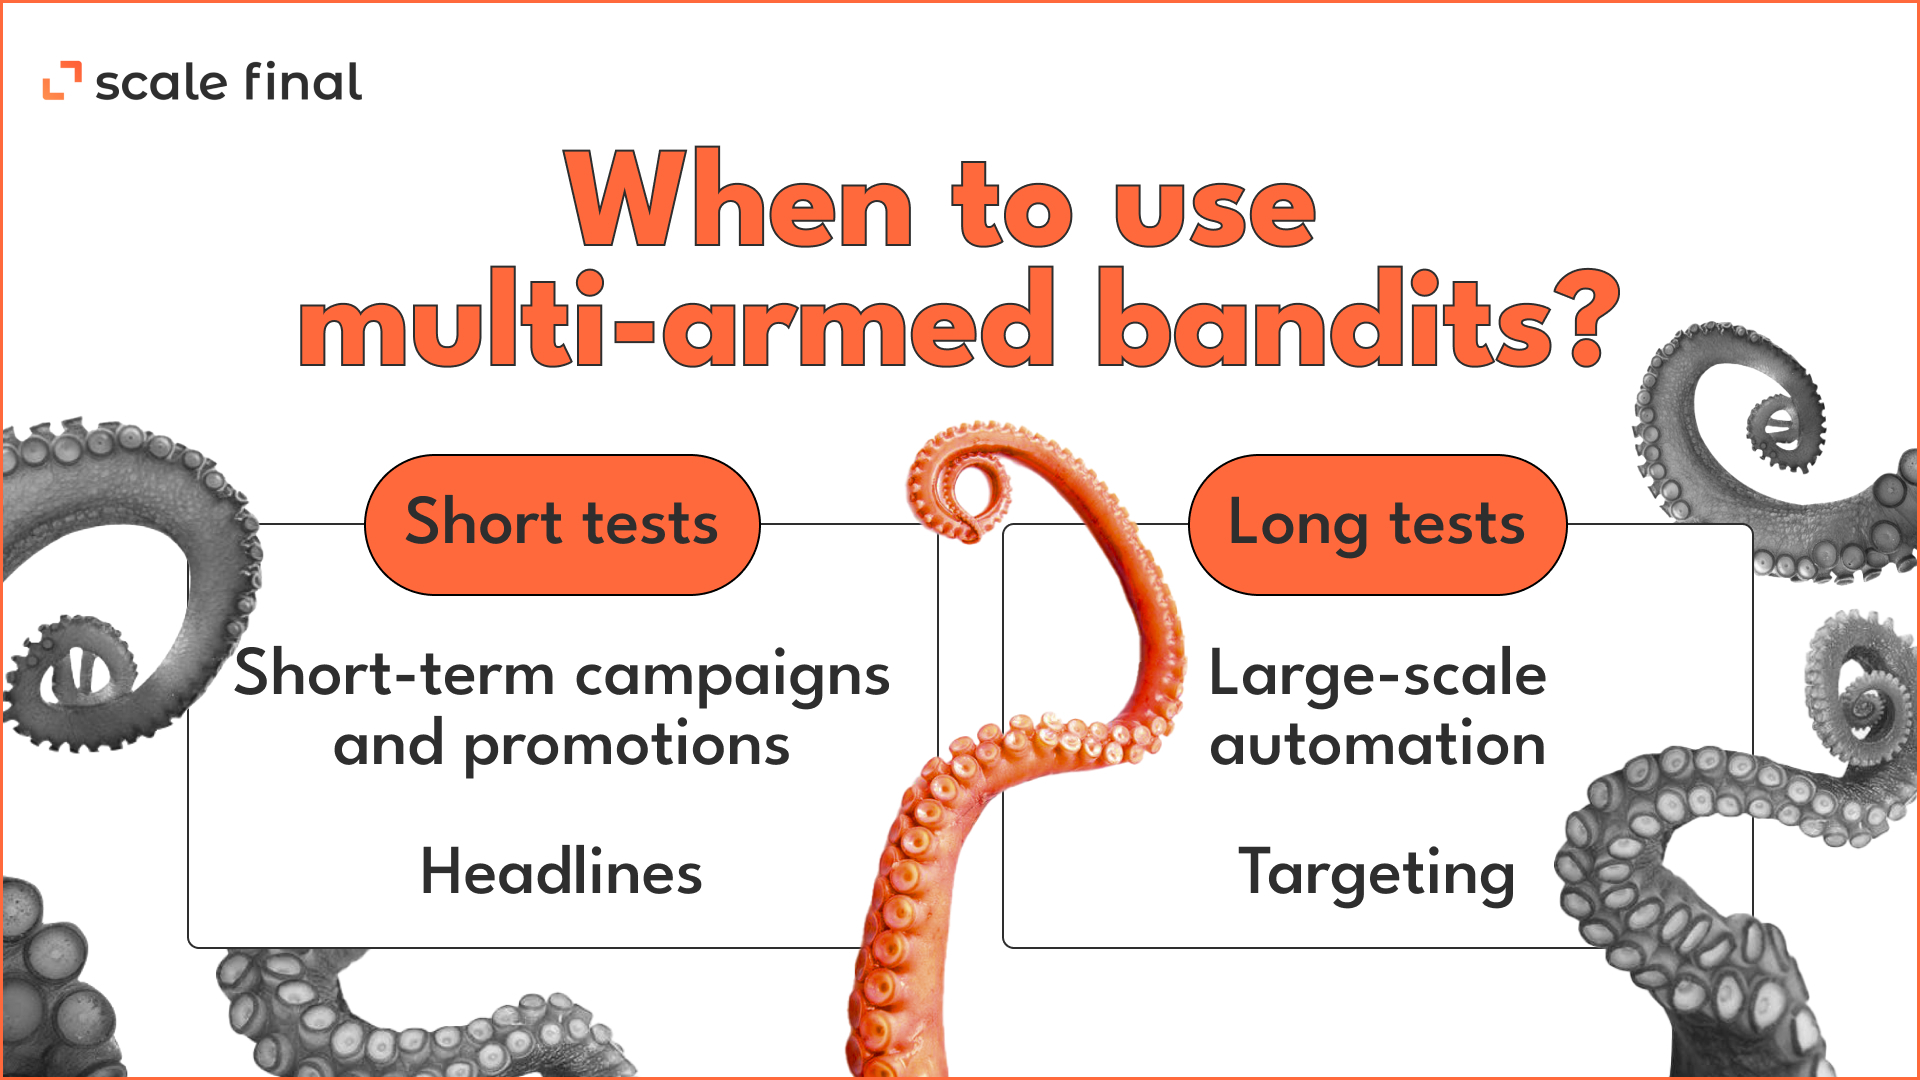 When to use multi-armed bandits?
Short tests
Headlines
Short-term campaigns and promotions

Long tests 
Large-scale automation 
Targeting 
